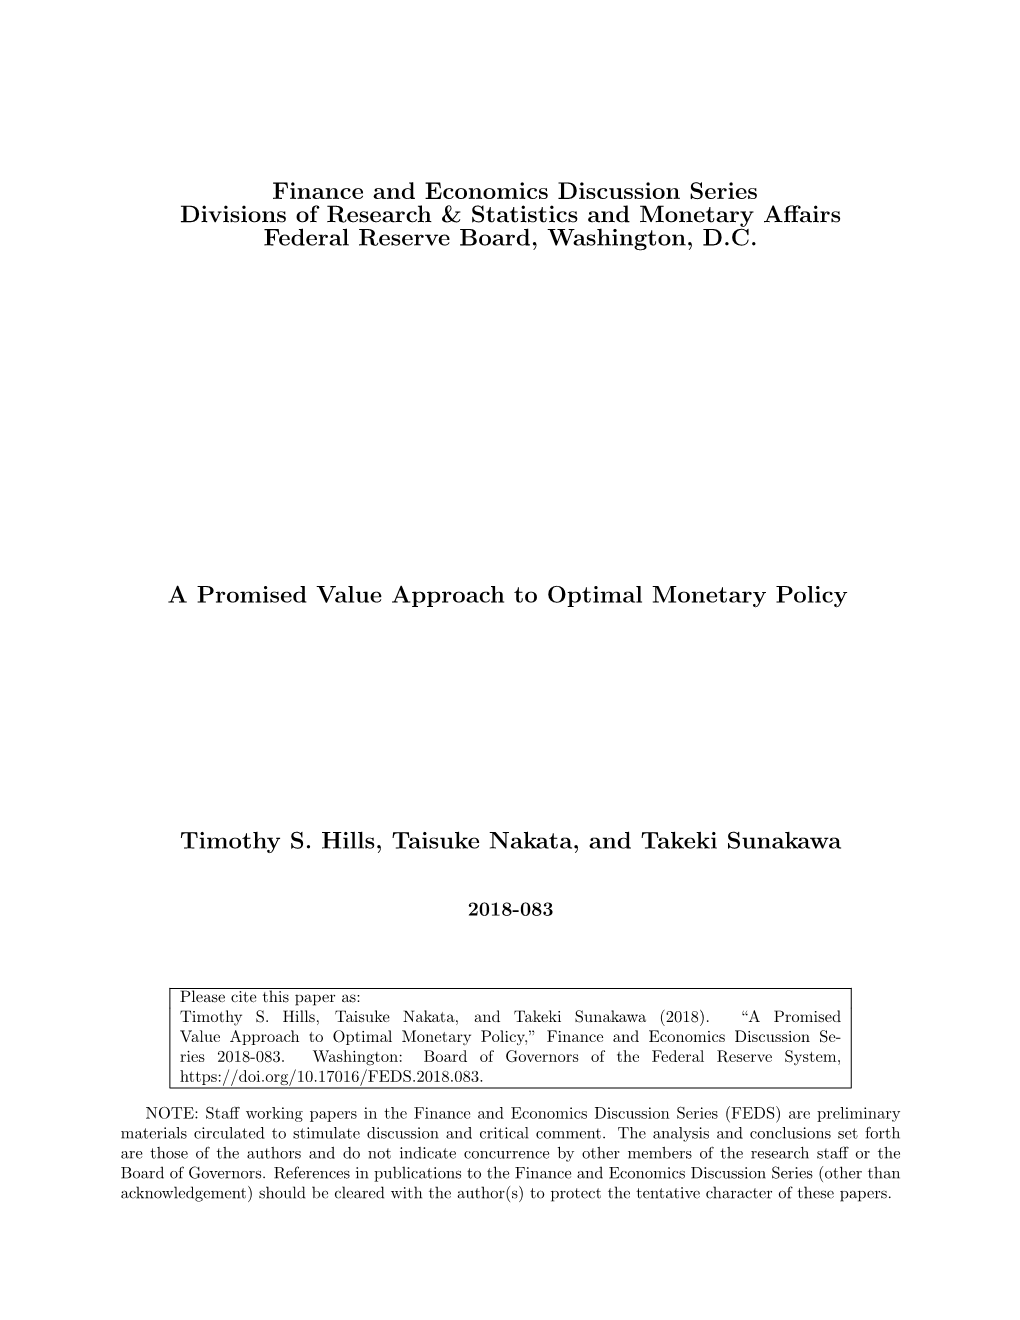 A Promised Value Approach to Optimal Monetary Policy